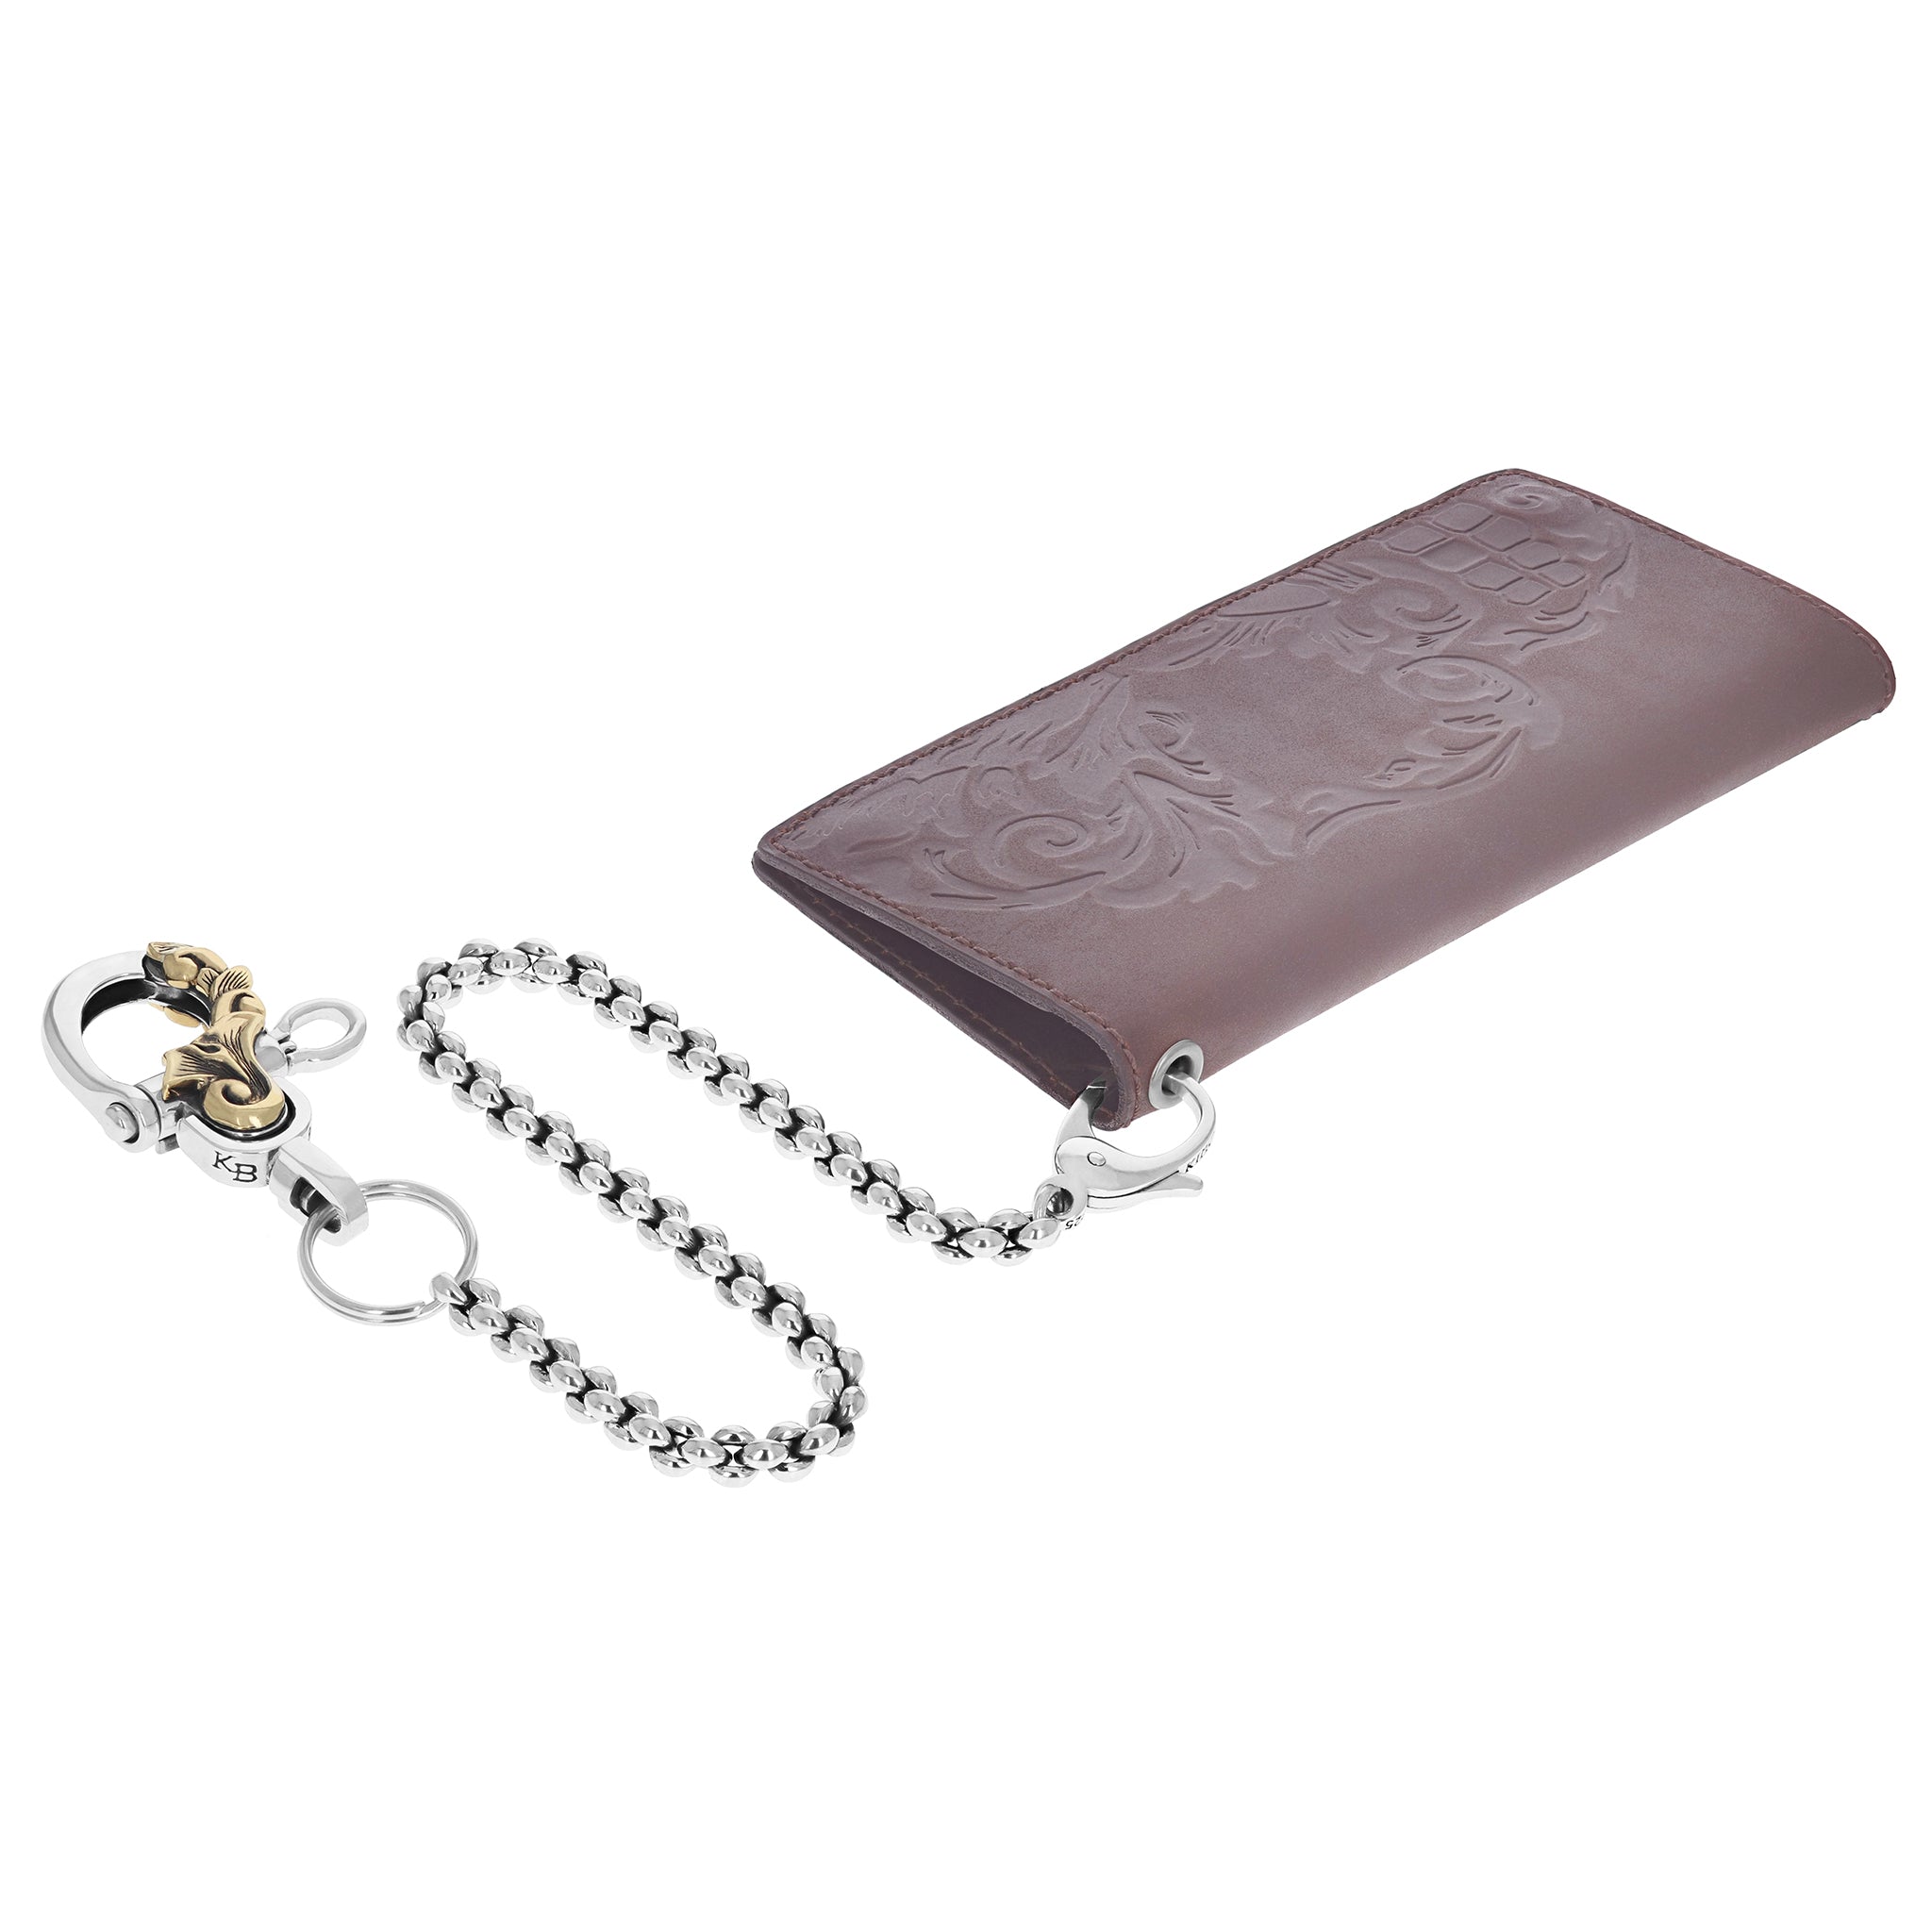 Infinity link wallet chain w/ gold alloy scroll design key fob